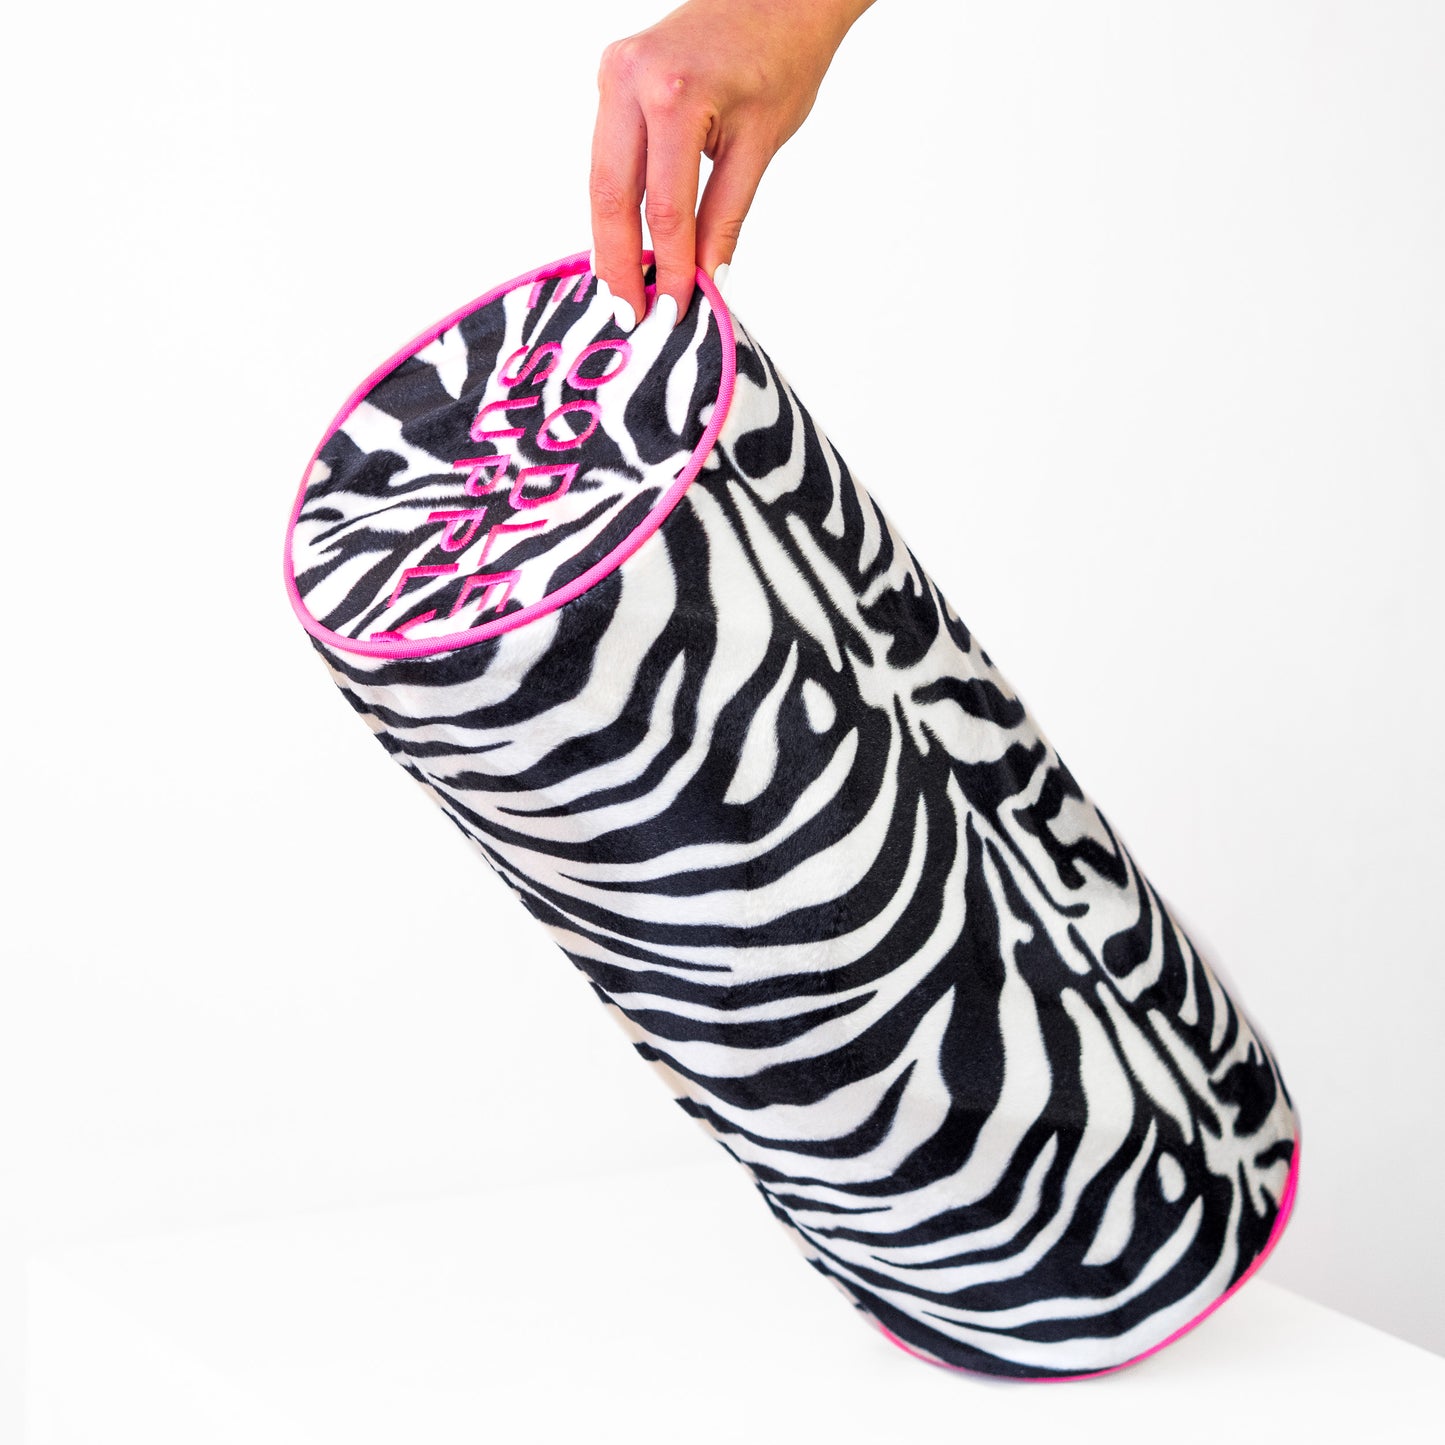 Poodle Supply Top Knot Pillow - Lord Zebra - Large